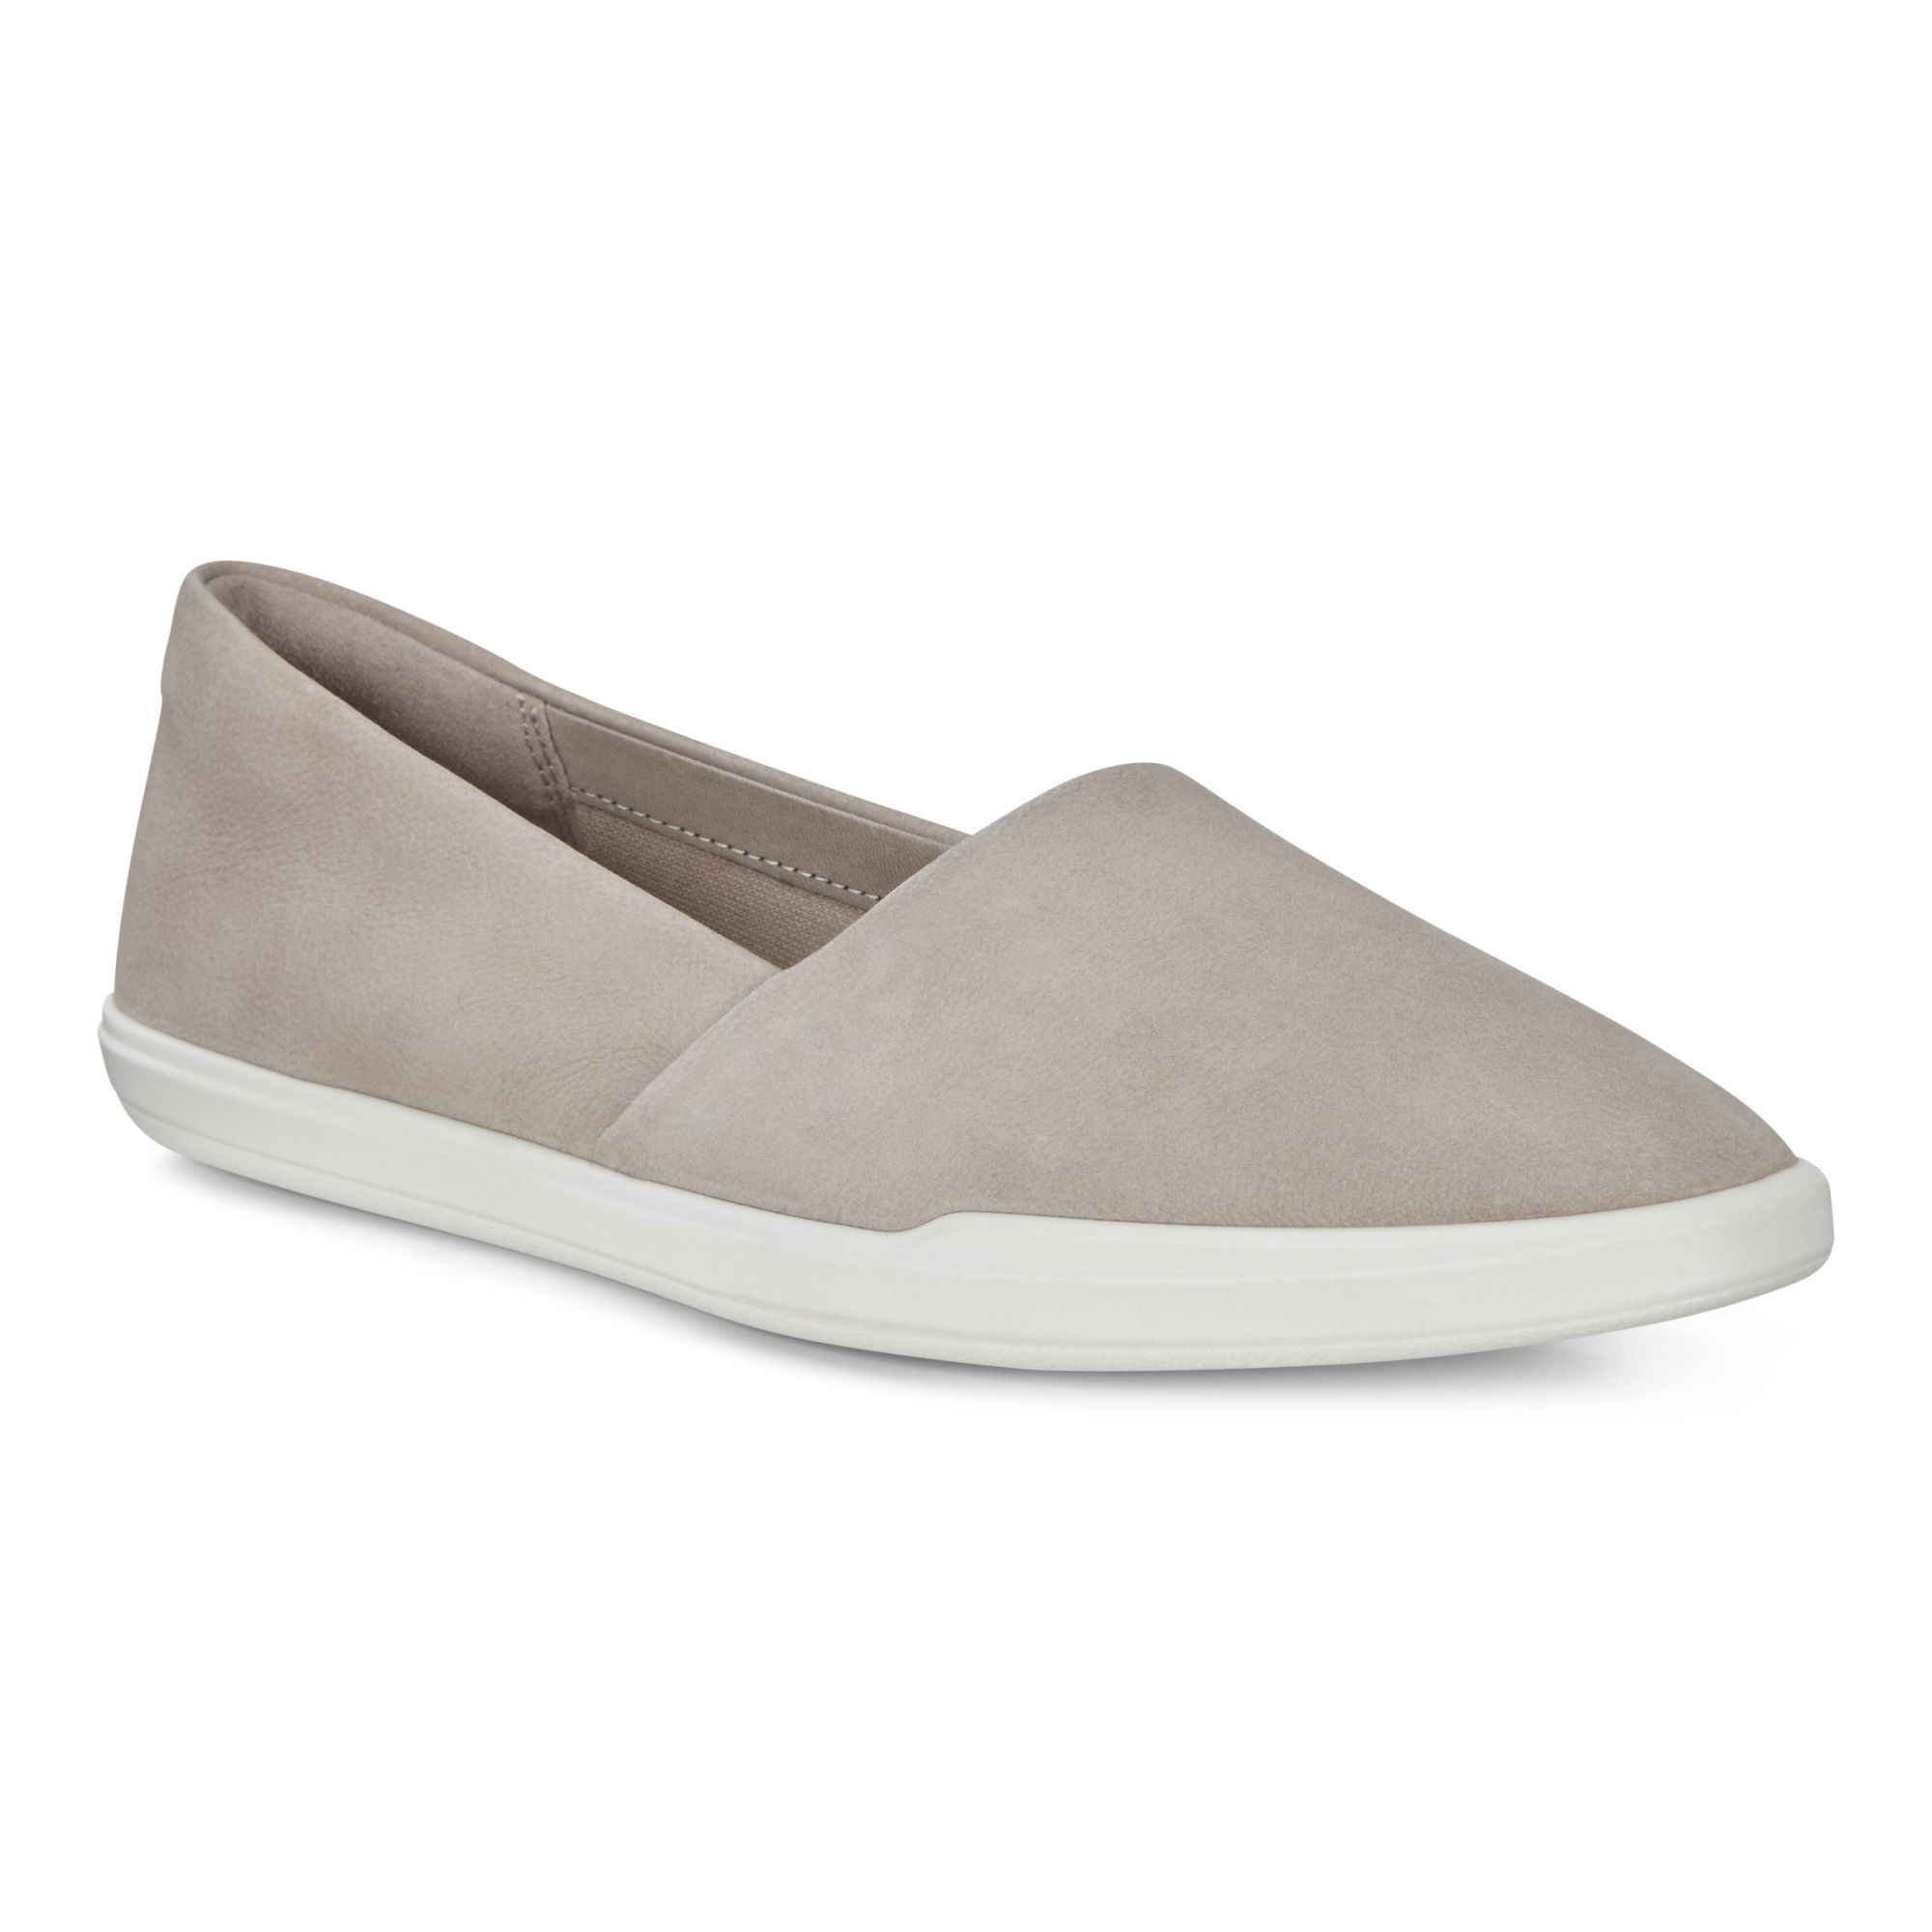 Ecco SIMPIL W Loafer 35 - Products - Veryk Mall - Veryk Mall, many